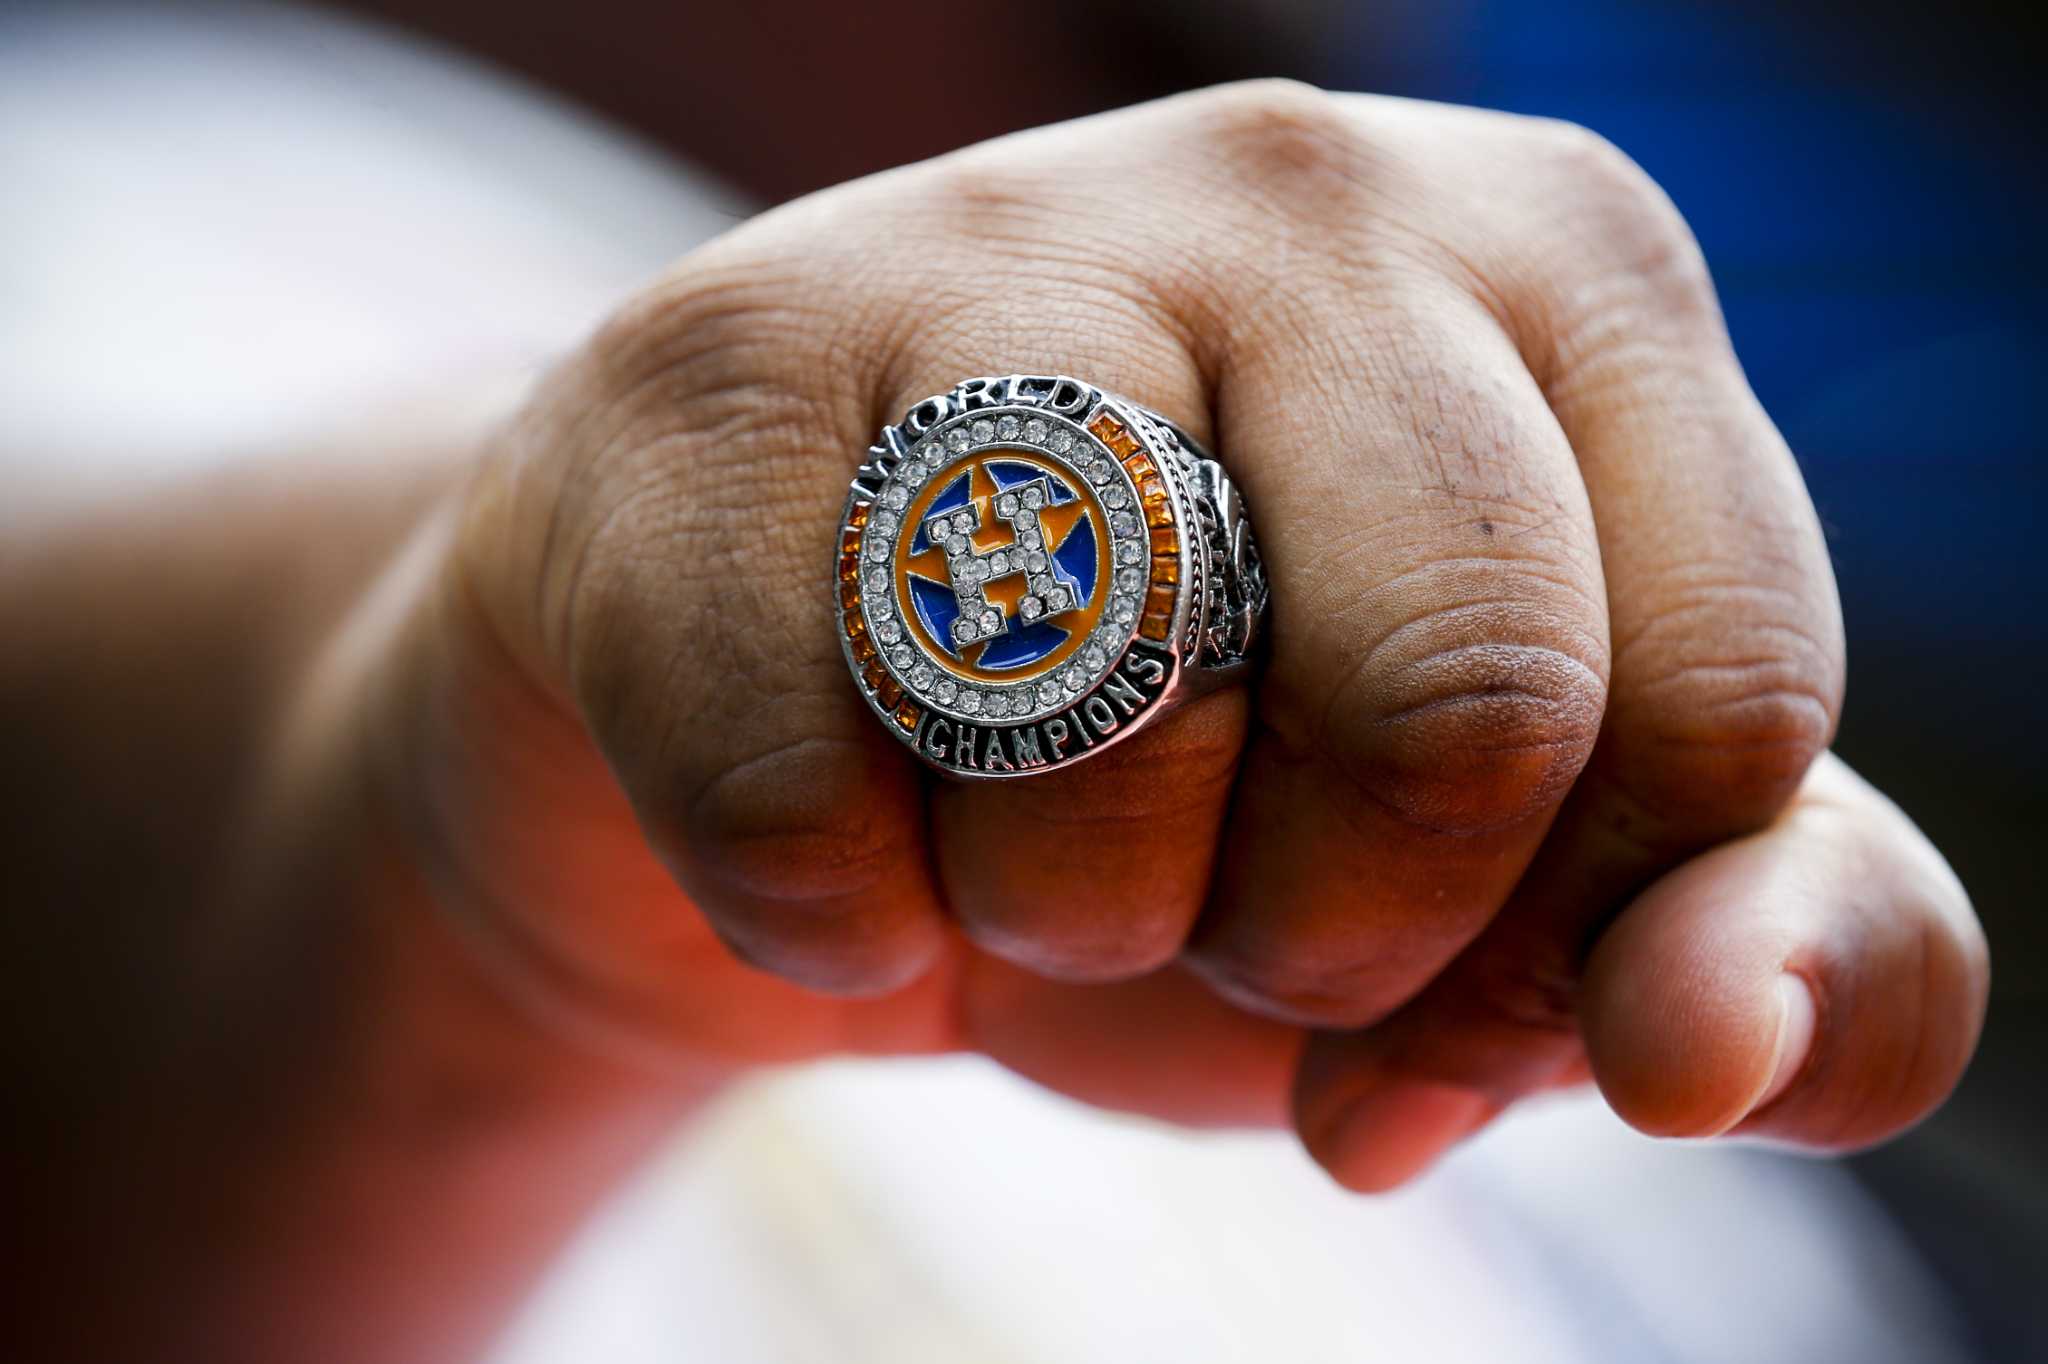 Astros World Series jewelry for fans